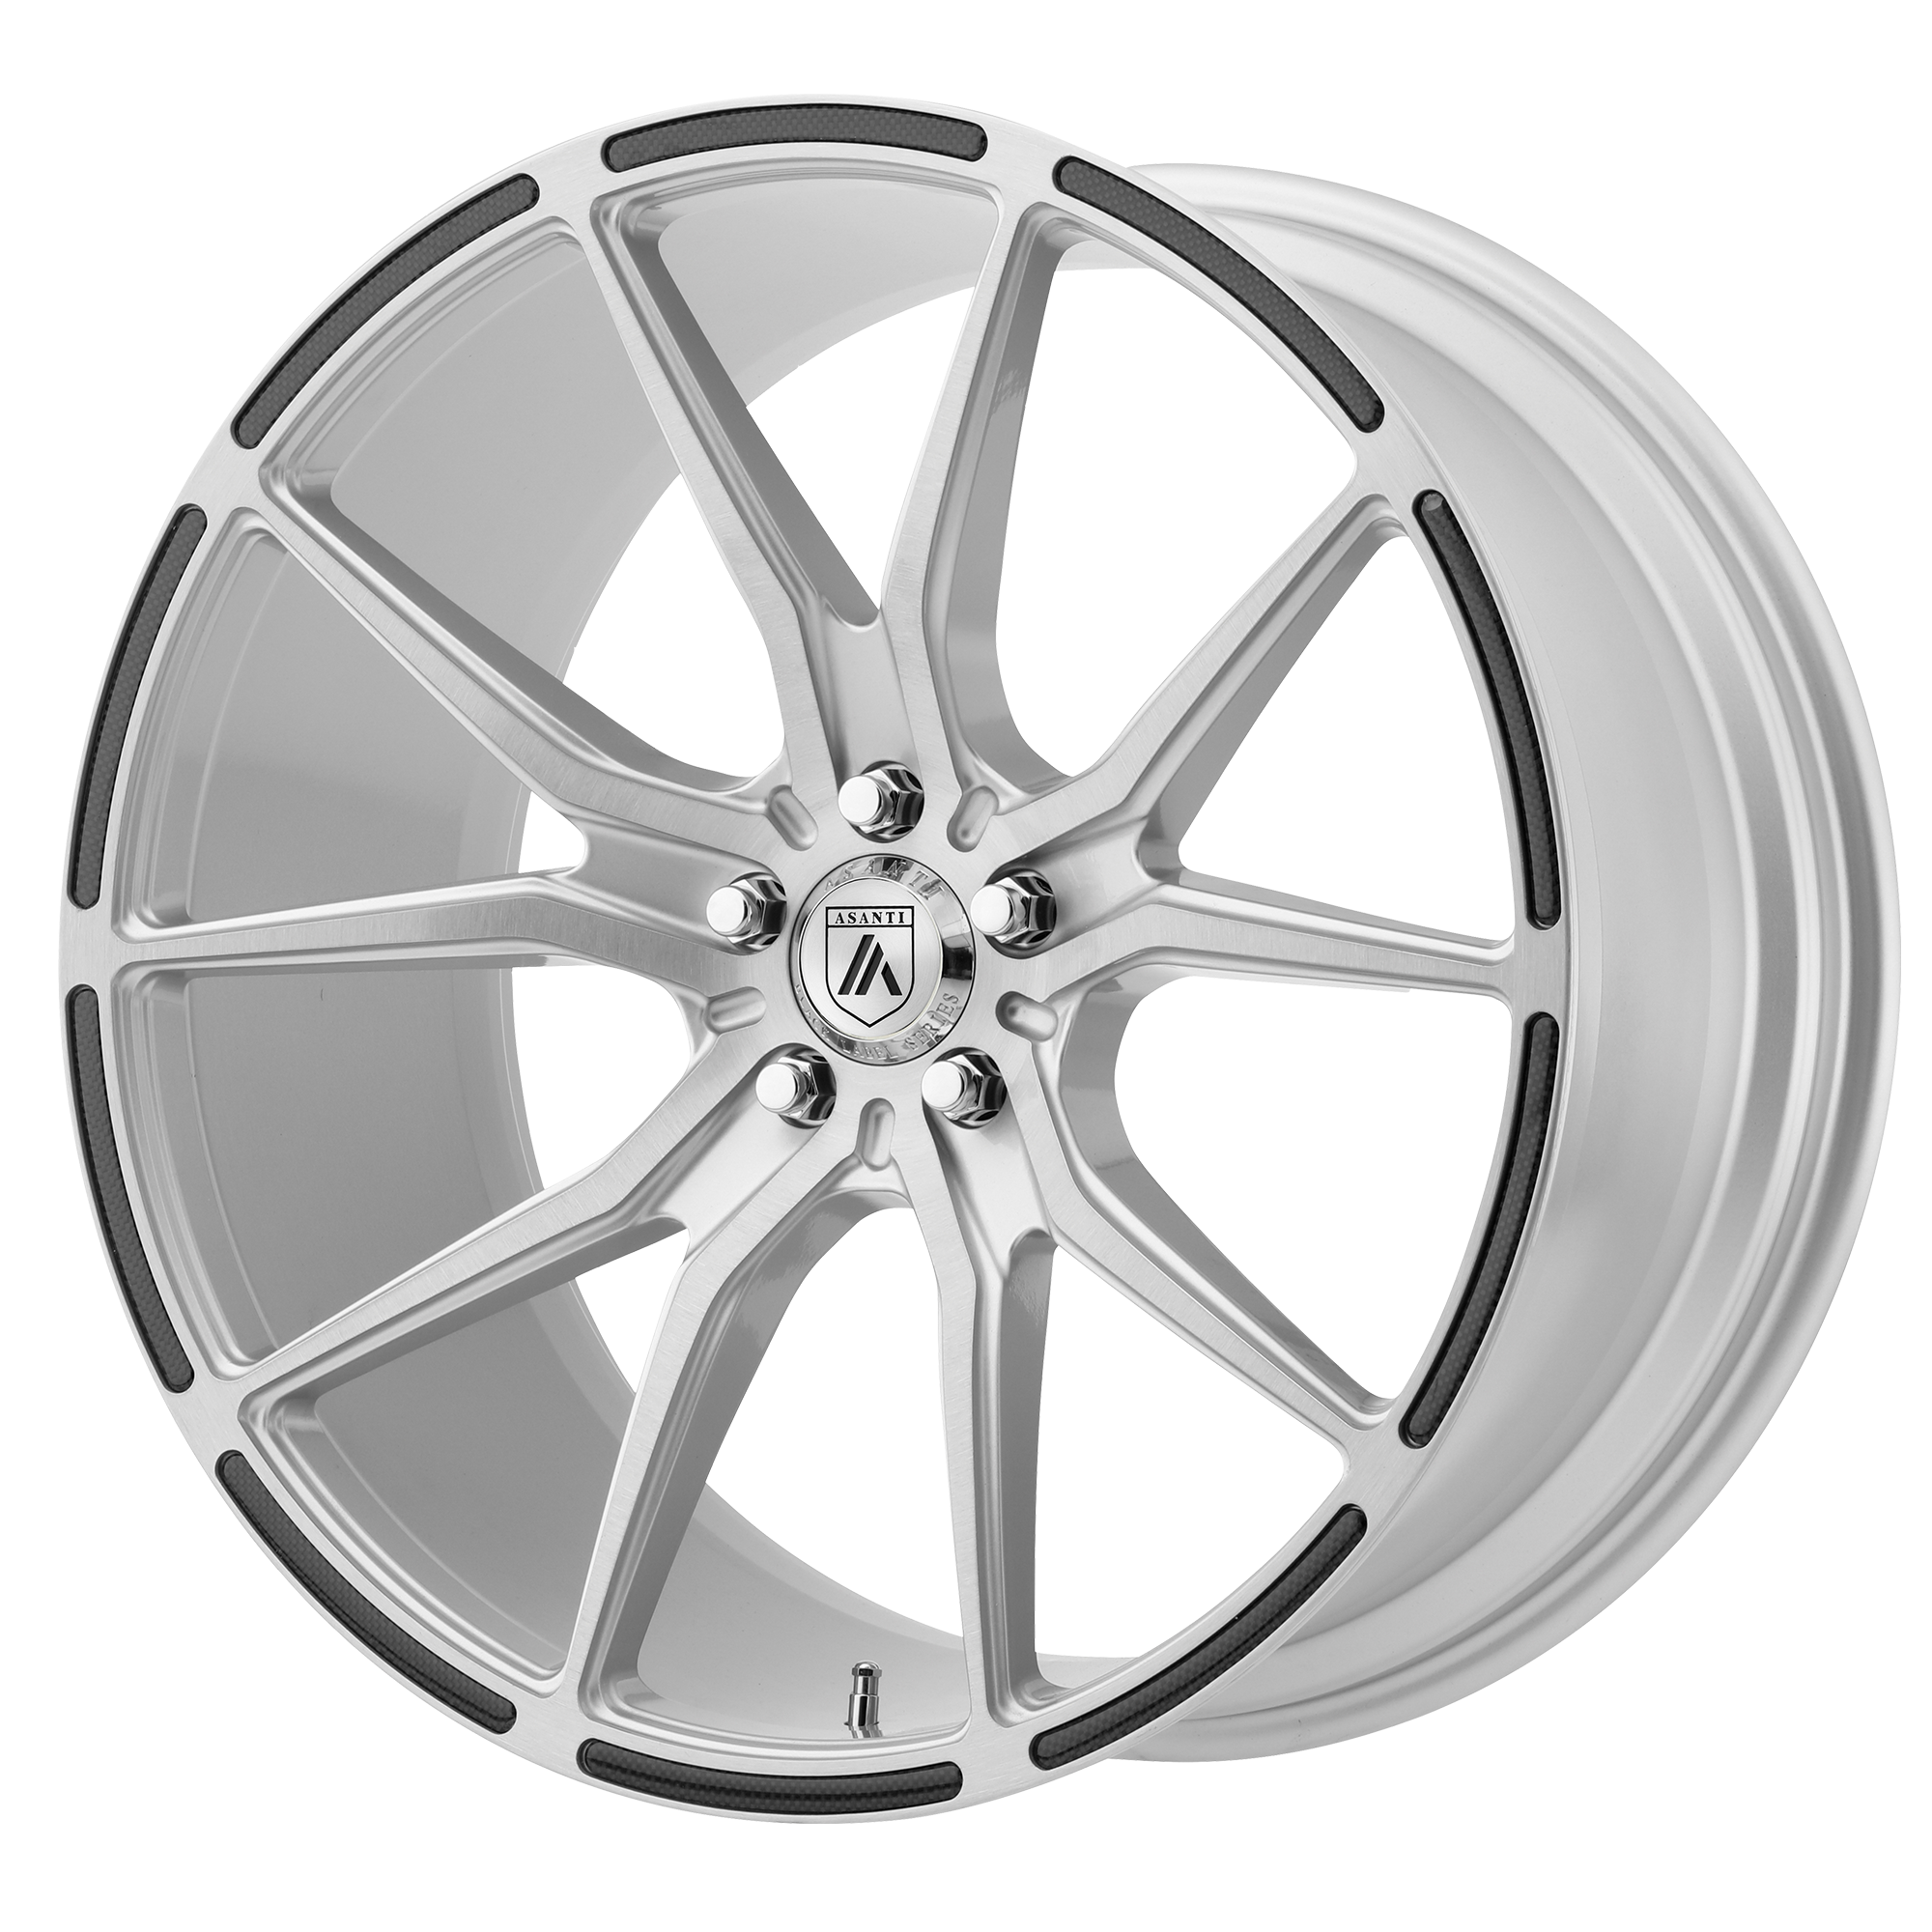 VEGA 20x8.5 Blank BRUSHED SILVER W/ CARBON FIBER INSERTS (38.00 - 45.00 mm) - Tires and Engine Performance